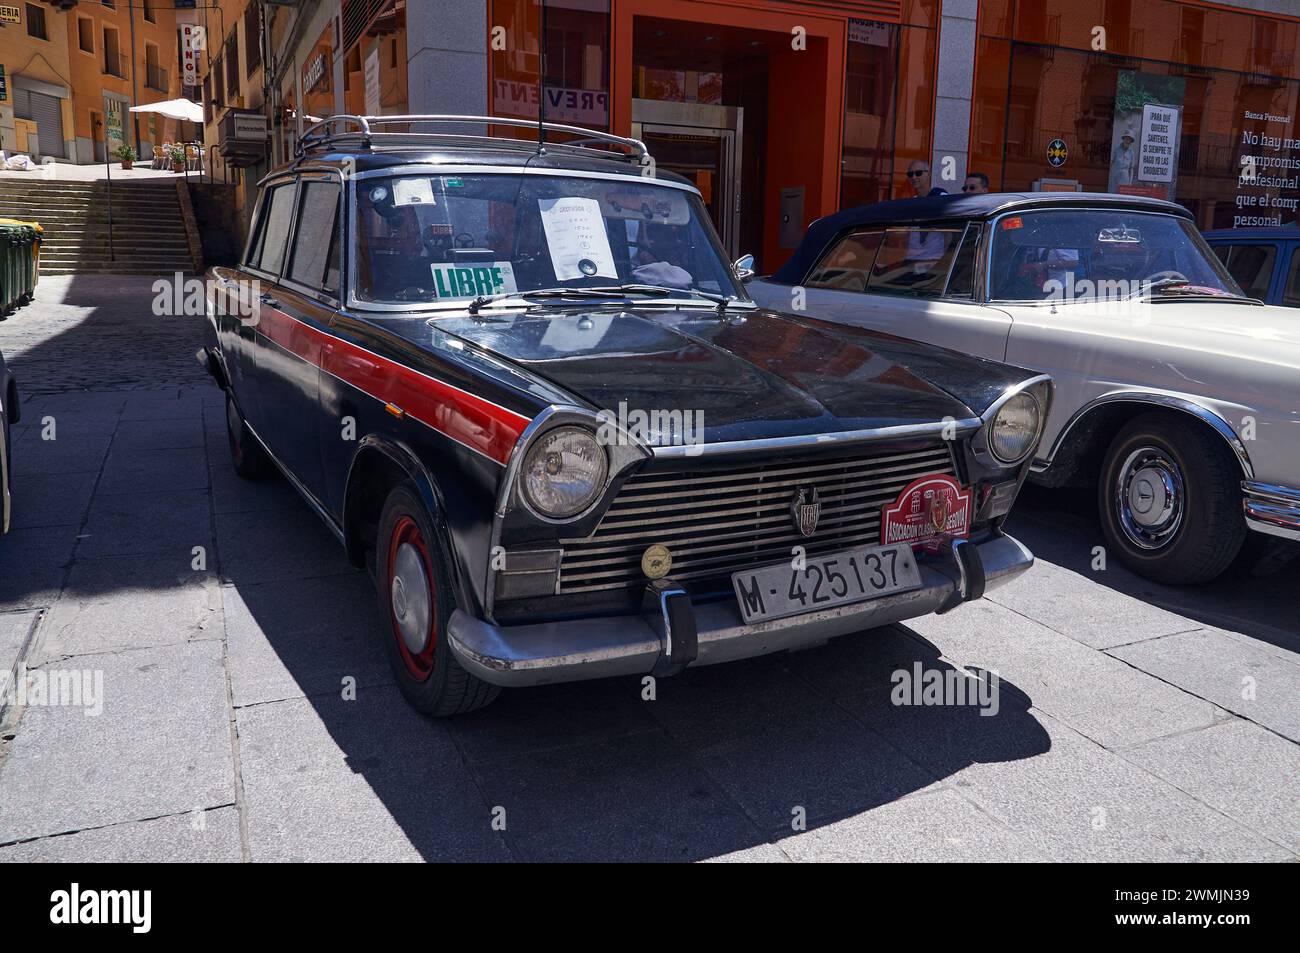 16-06-2013 Segovia, Spain - A vintage SEAT taxi, black and red, stands out at an antique car gathering Stock Photo